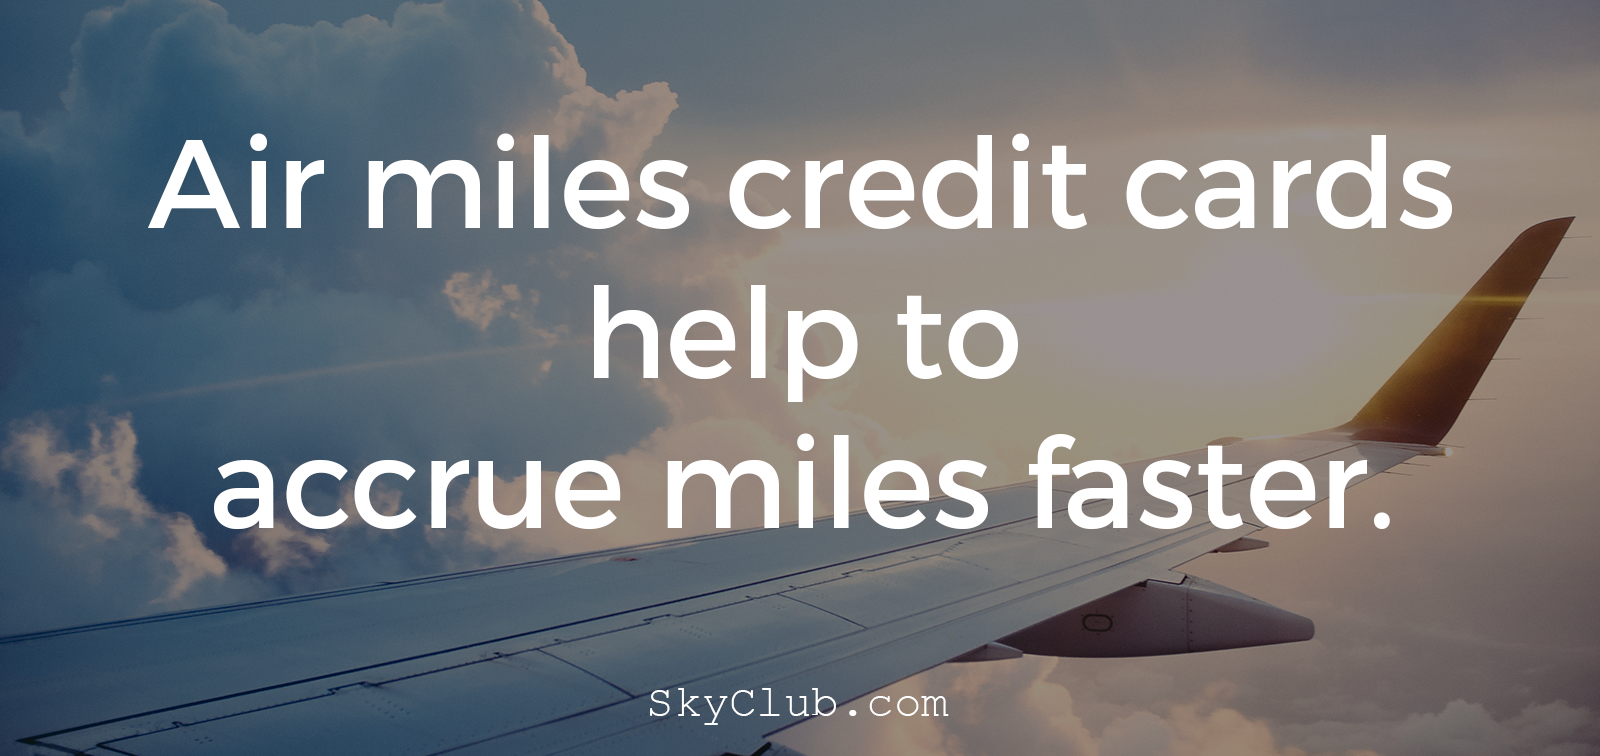 How to collect air miles